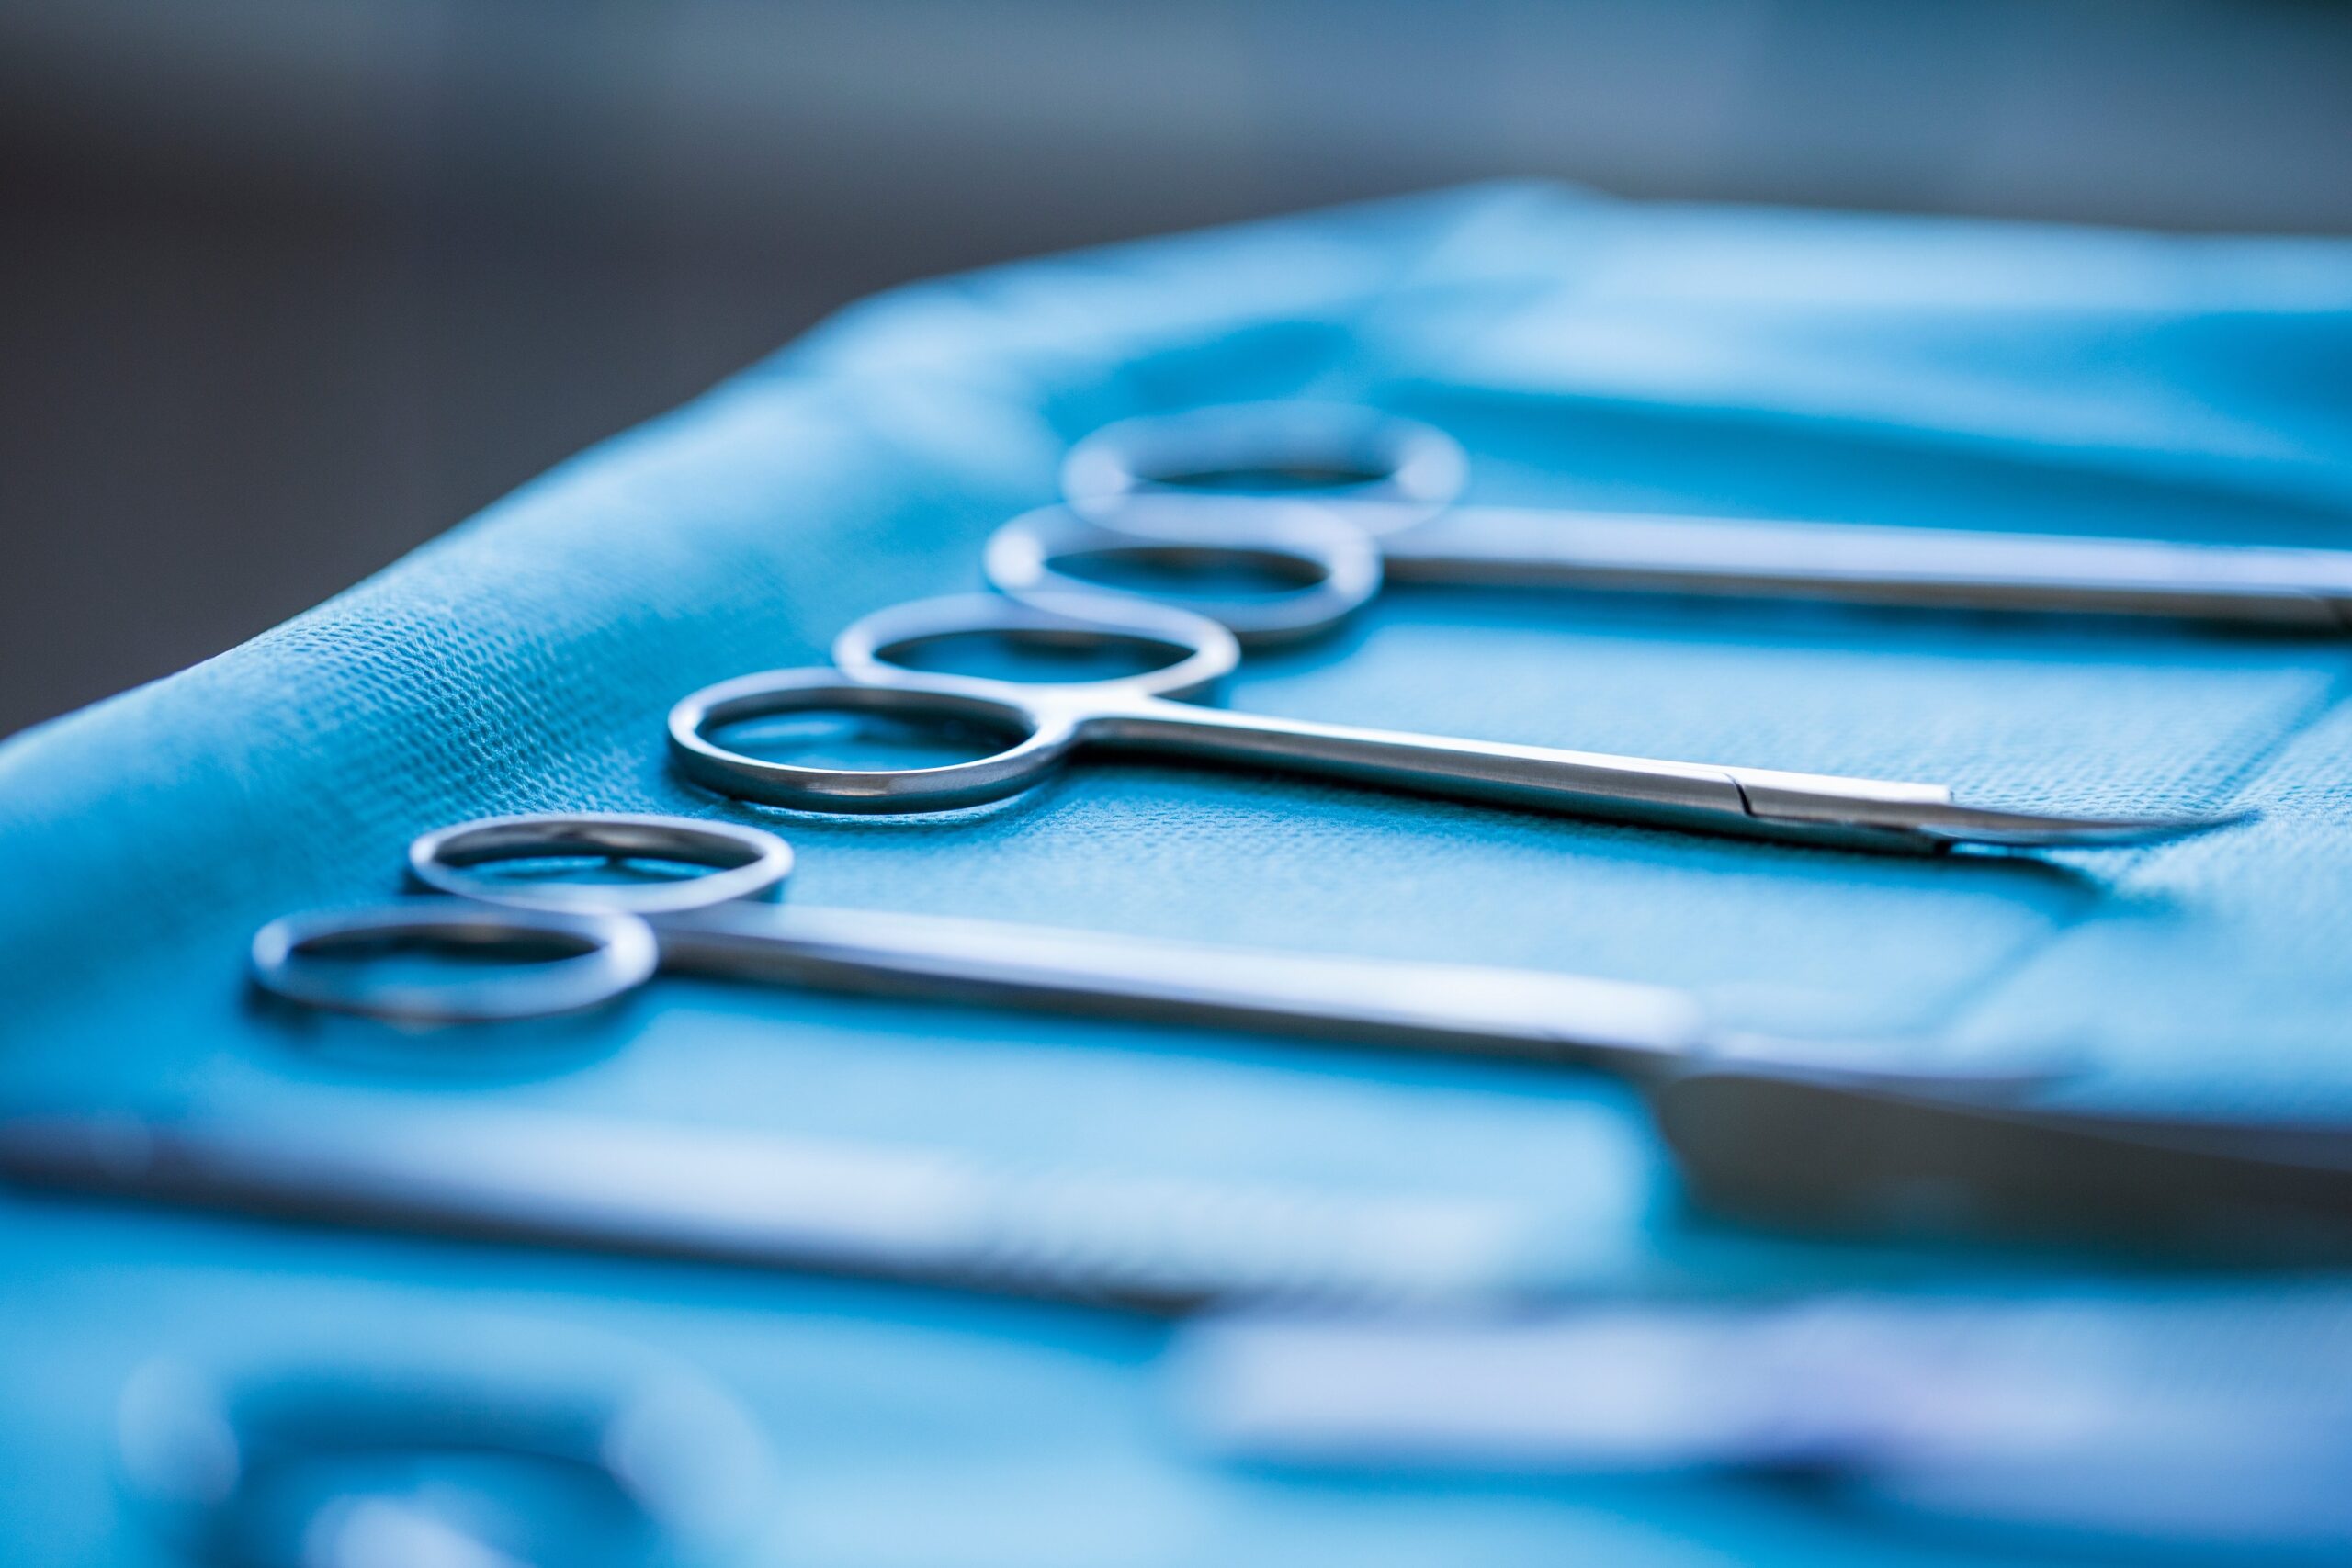 Safety in the Operating Room Begins with Sterile Processing